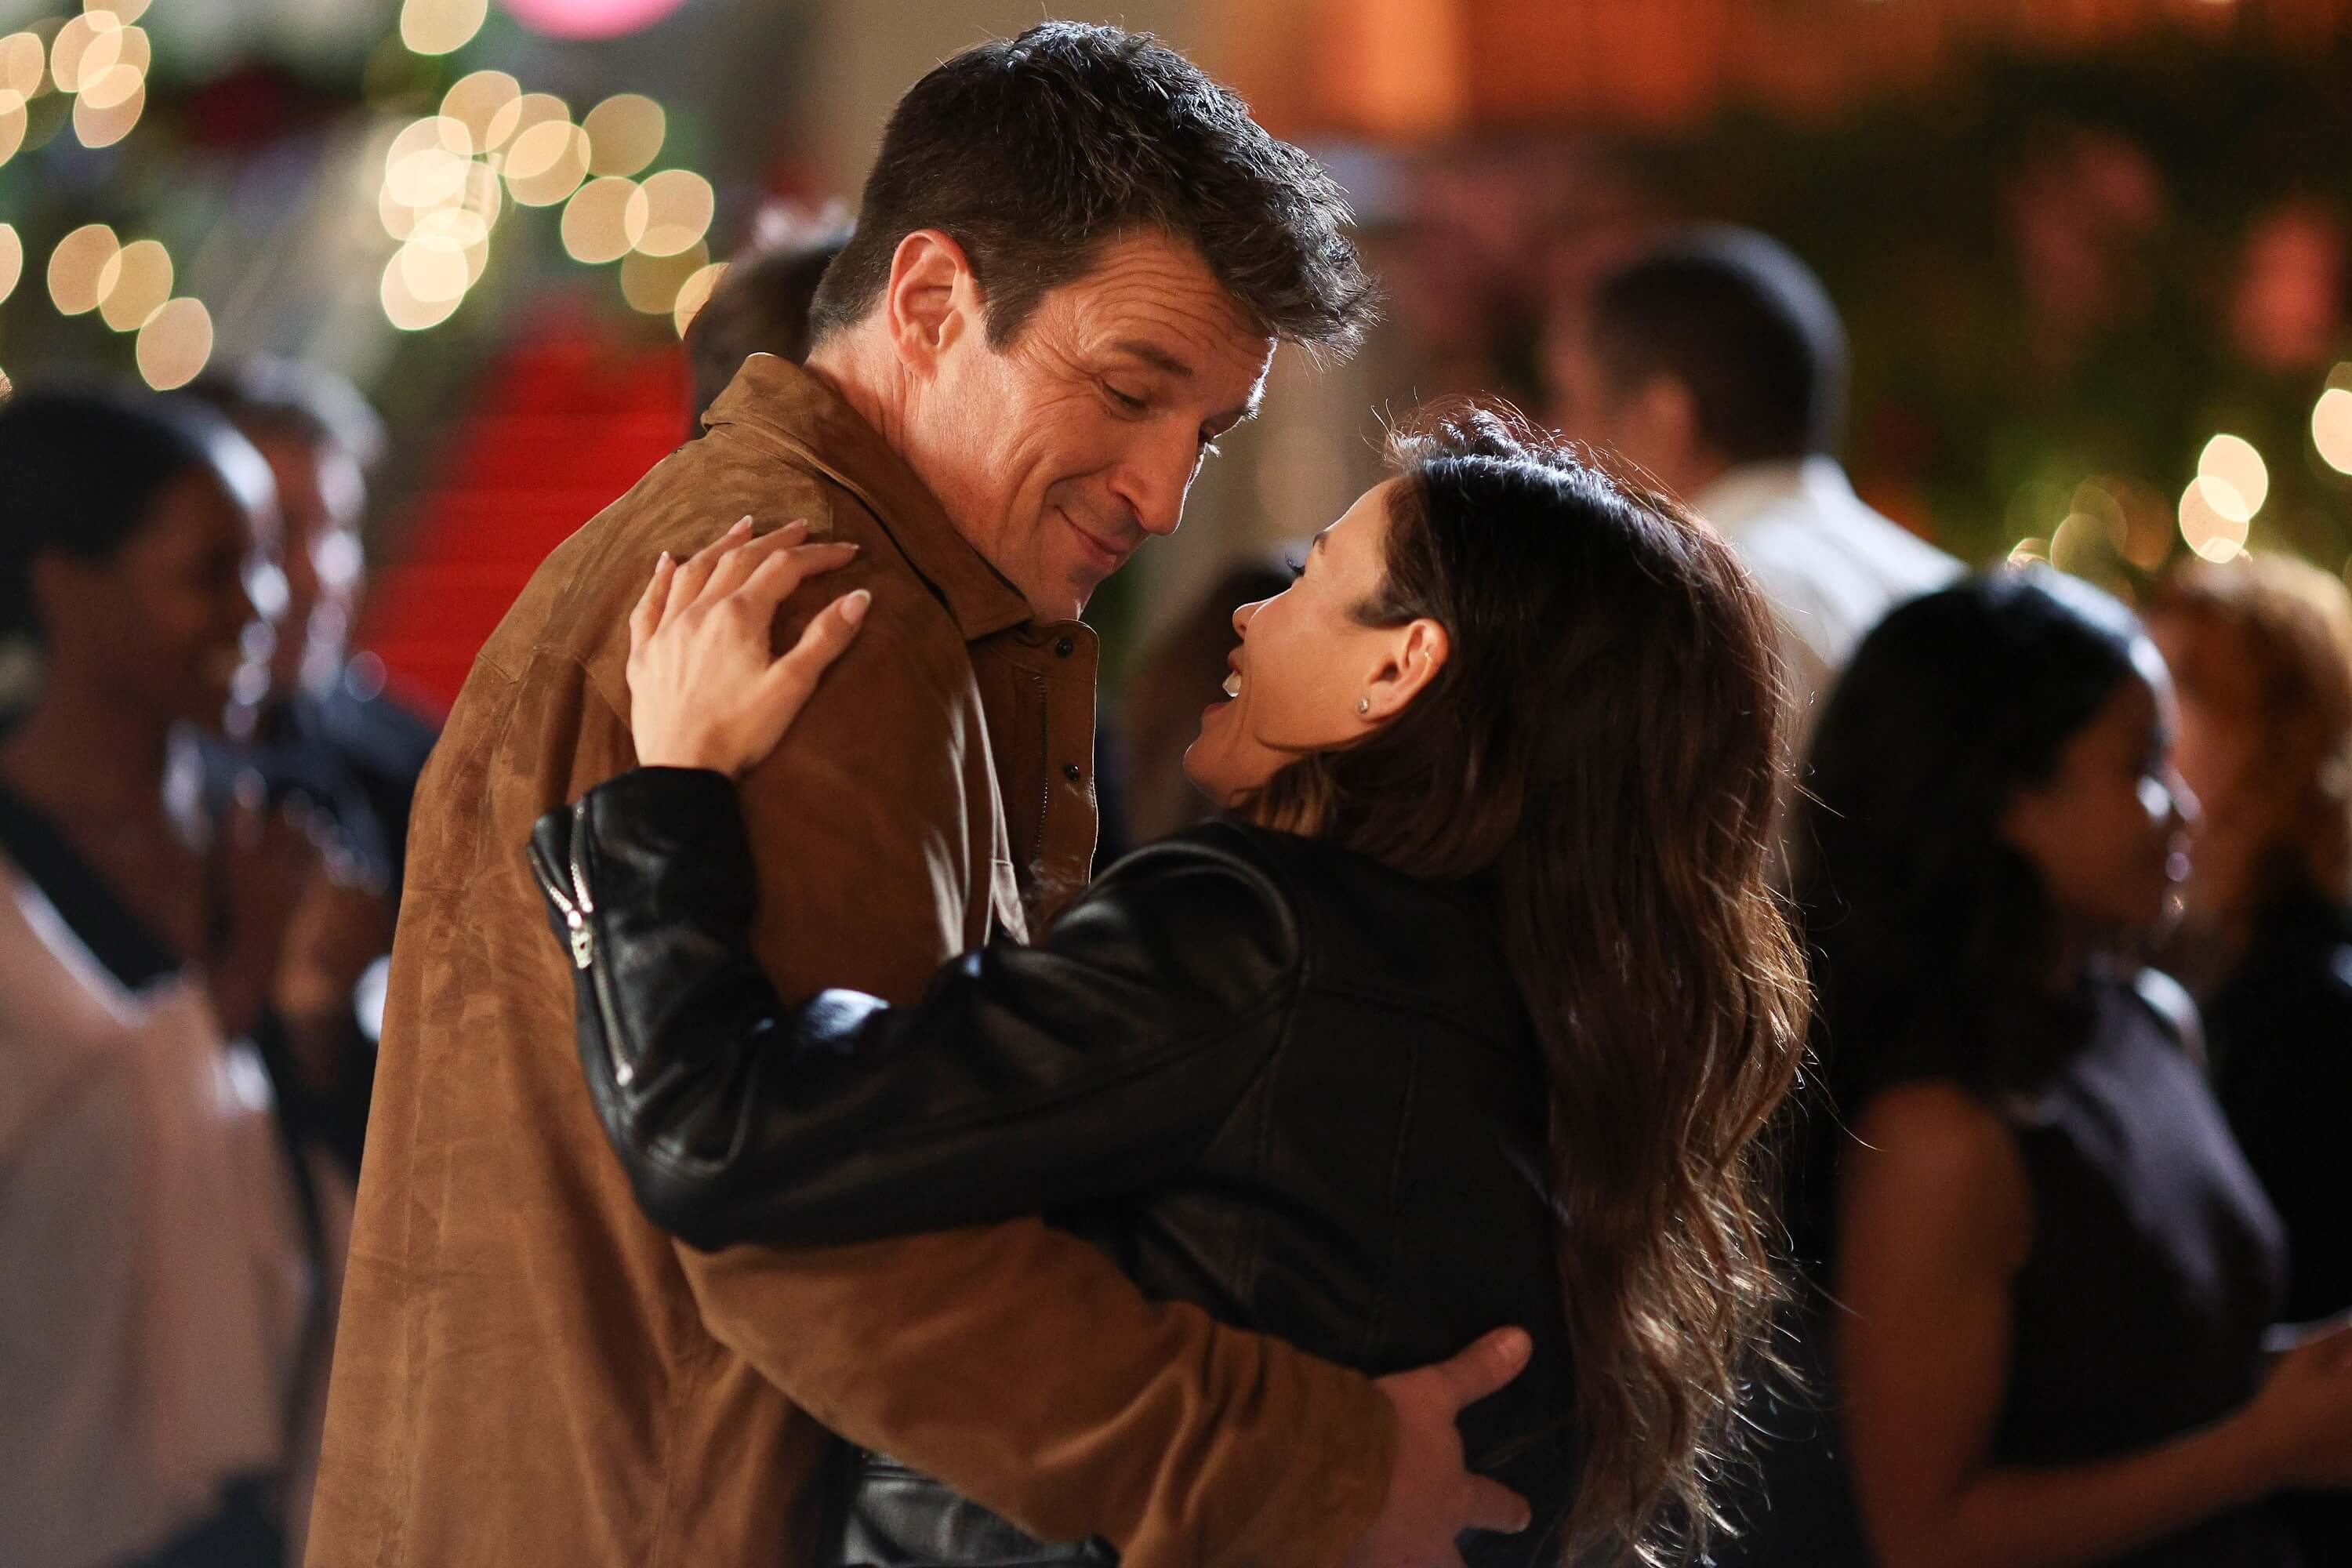 Nathan Fillion and Jenna Dewan star as John Nolan and Bailey Nune in 'The Rookie' Season 5. They share a scene where they are dancing. Nolan wears a light brown jacket. Bailey wears a black leather jacket.